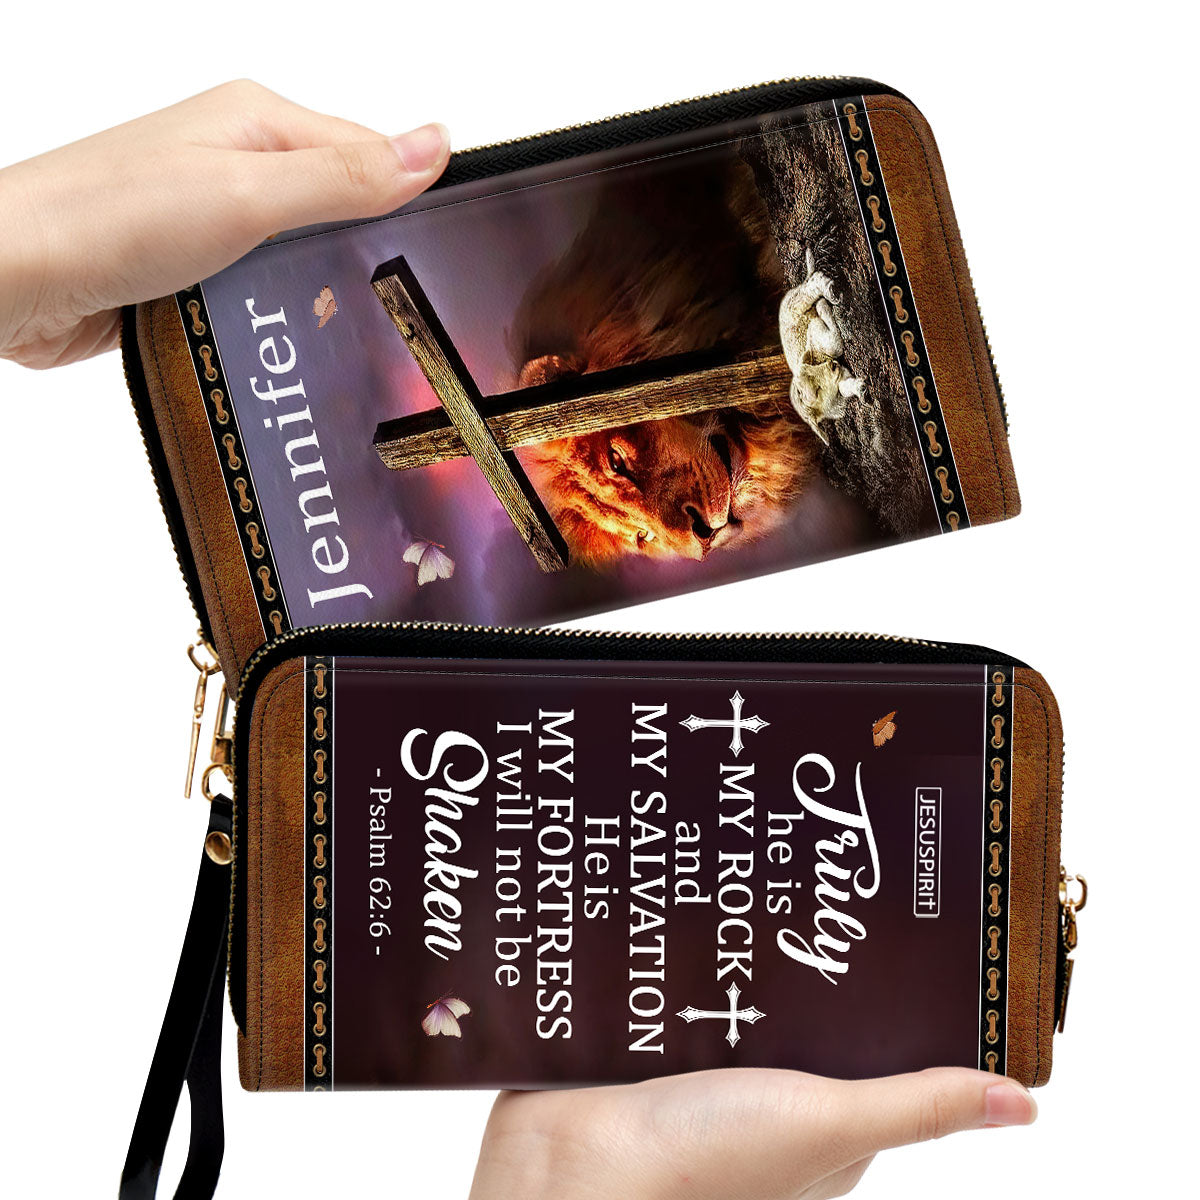 Jesuspirit | He Is My Fortress, I Will Not Be Shaken | Psalm 62:6 | Lion And Lamb | Gifts Scripture For Religious Women | Personalized Zippered Leather Clutch Purse NUM443C